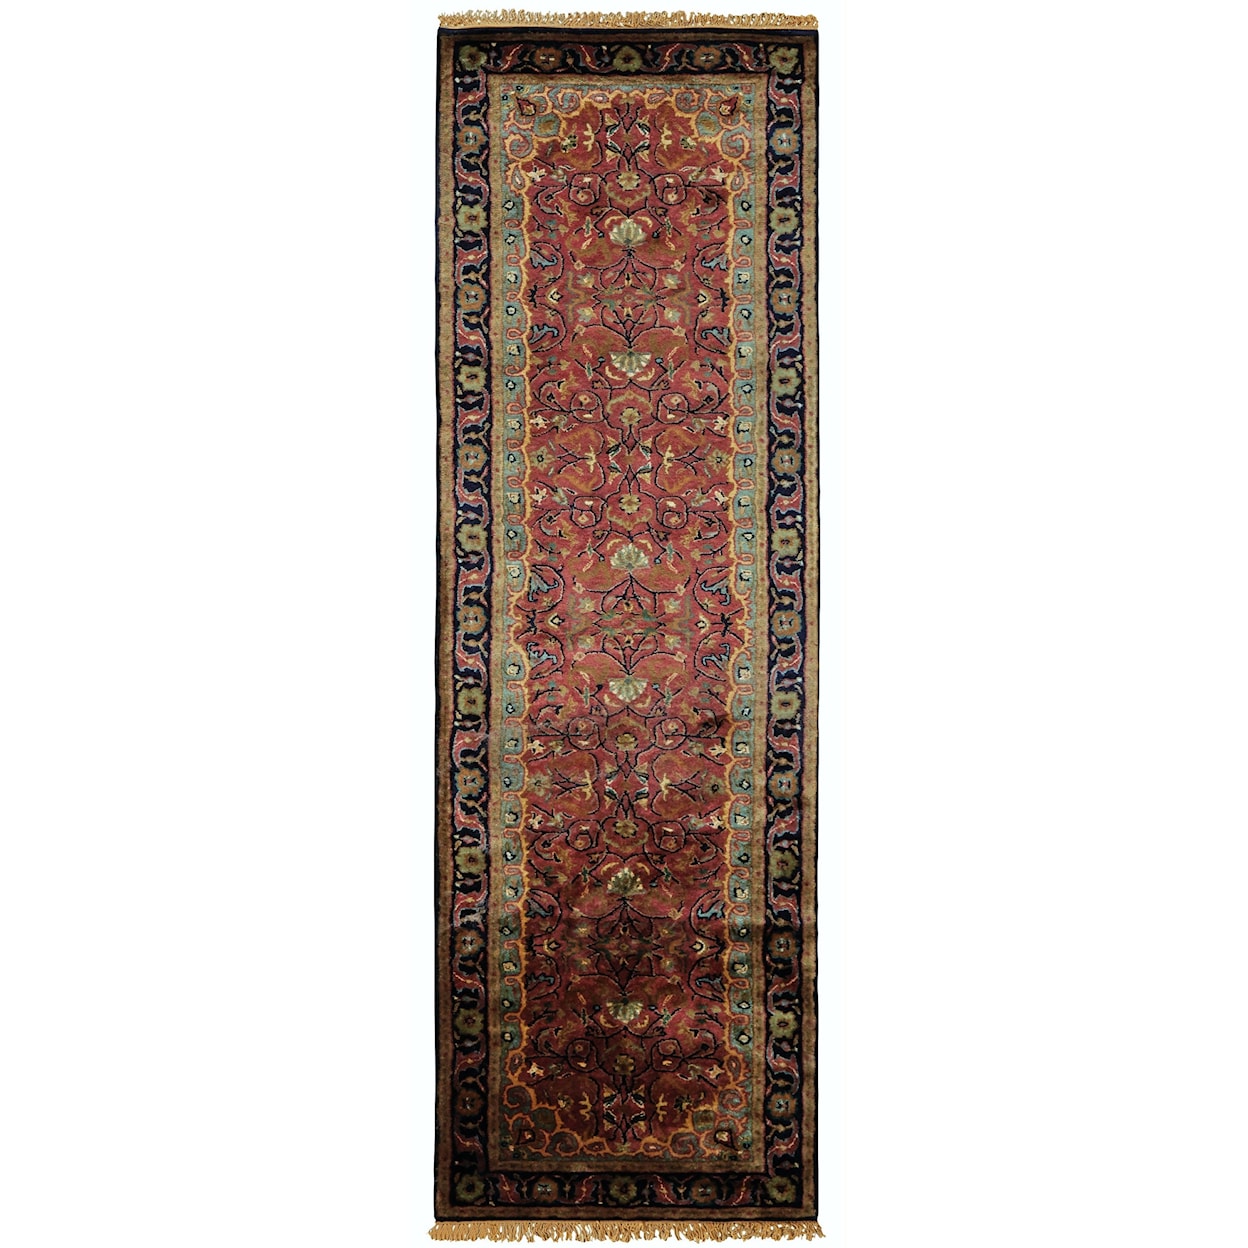 Feizy Rugs Amore Plum 9'-6" x 13'-6" Area Rug